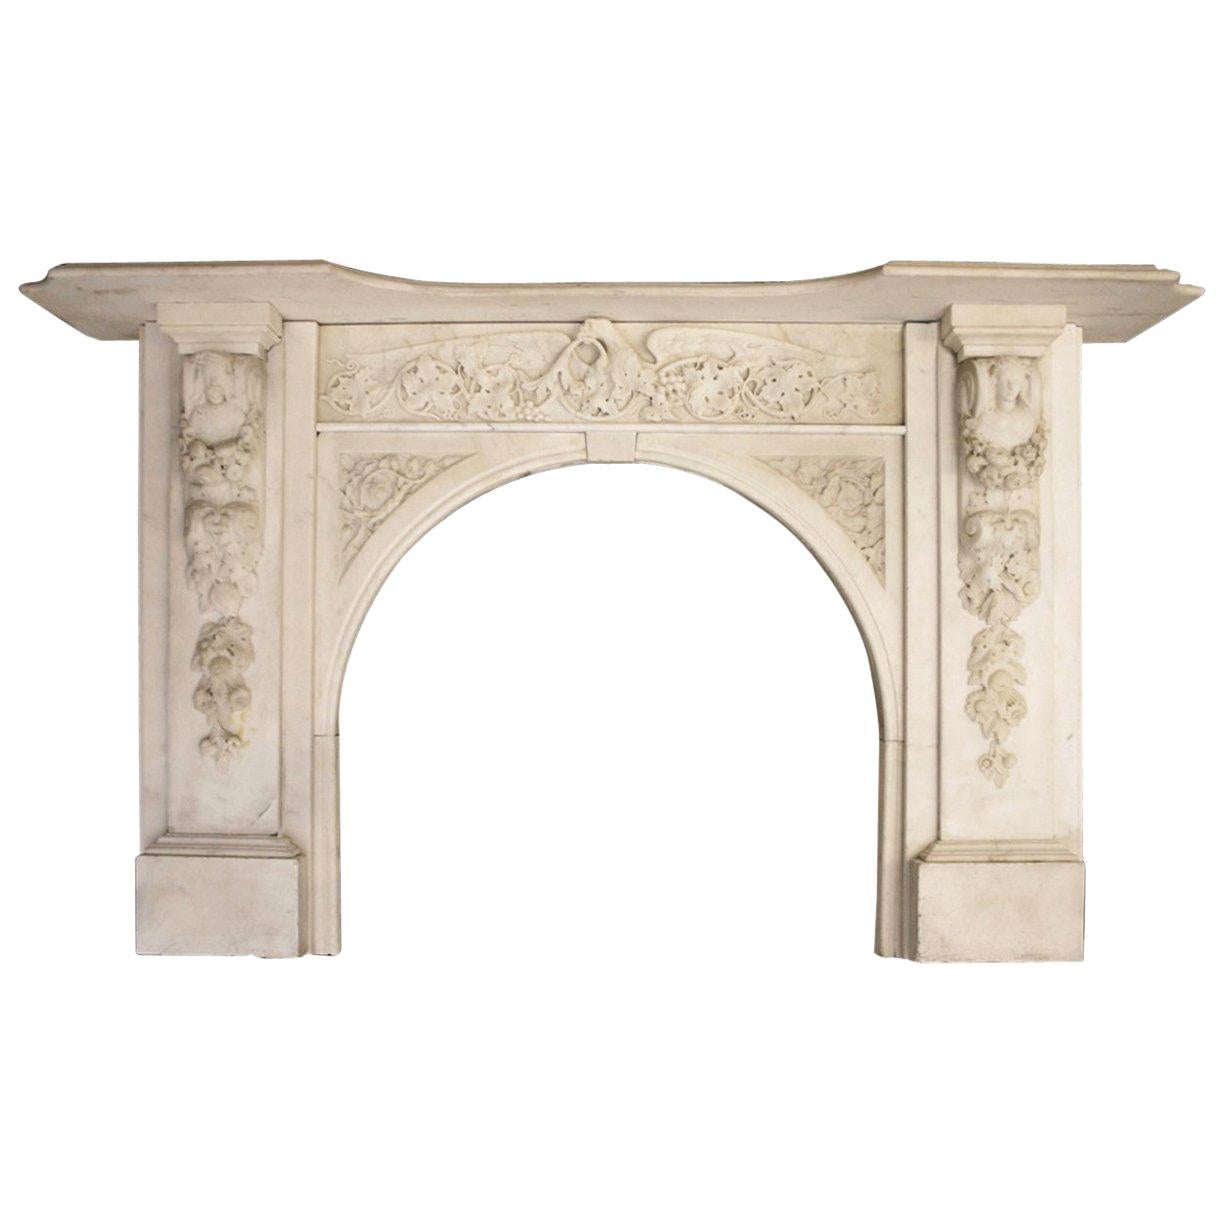 Spectacular Antique Early Victorian Carved Marble Chimneypiece